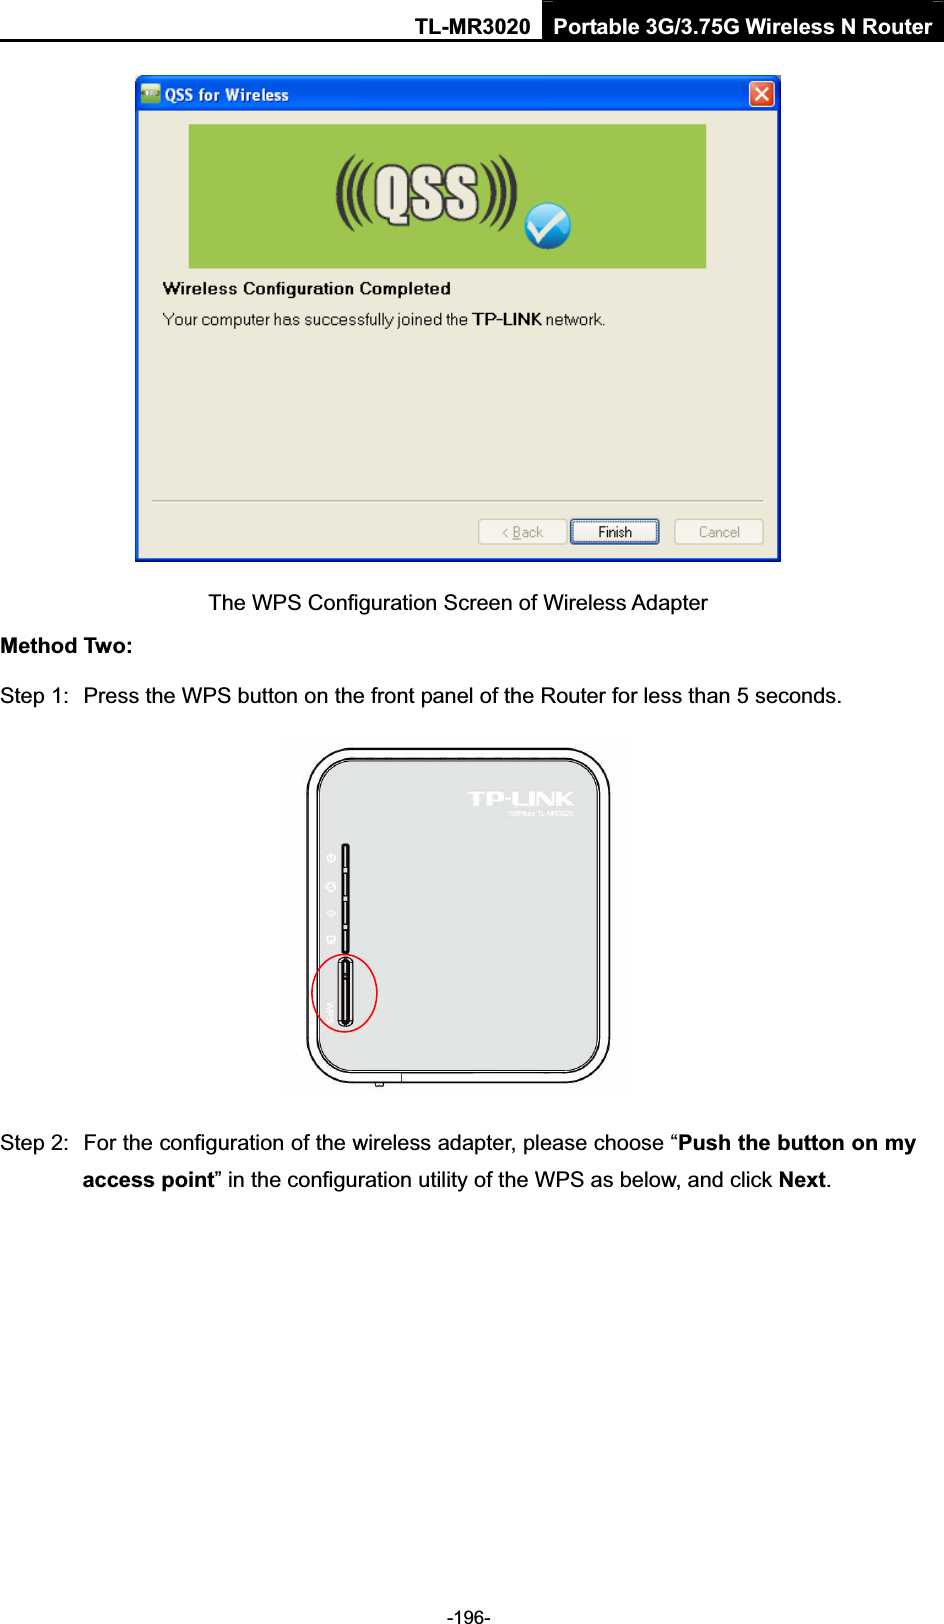 TL-MR3020 Portable 3G/3.75G Wireless N Router-196-The WPS Configuration Screen of Wireless Adapter   Method Two: Step 1:  Press the WPS button on the front panel of the Router for less than 5 seconds. Step 2:  For the configuration of the wireless adapter, please choose “Push the button on my access point” in the configuration utility of the WPS as below, and click Next.